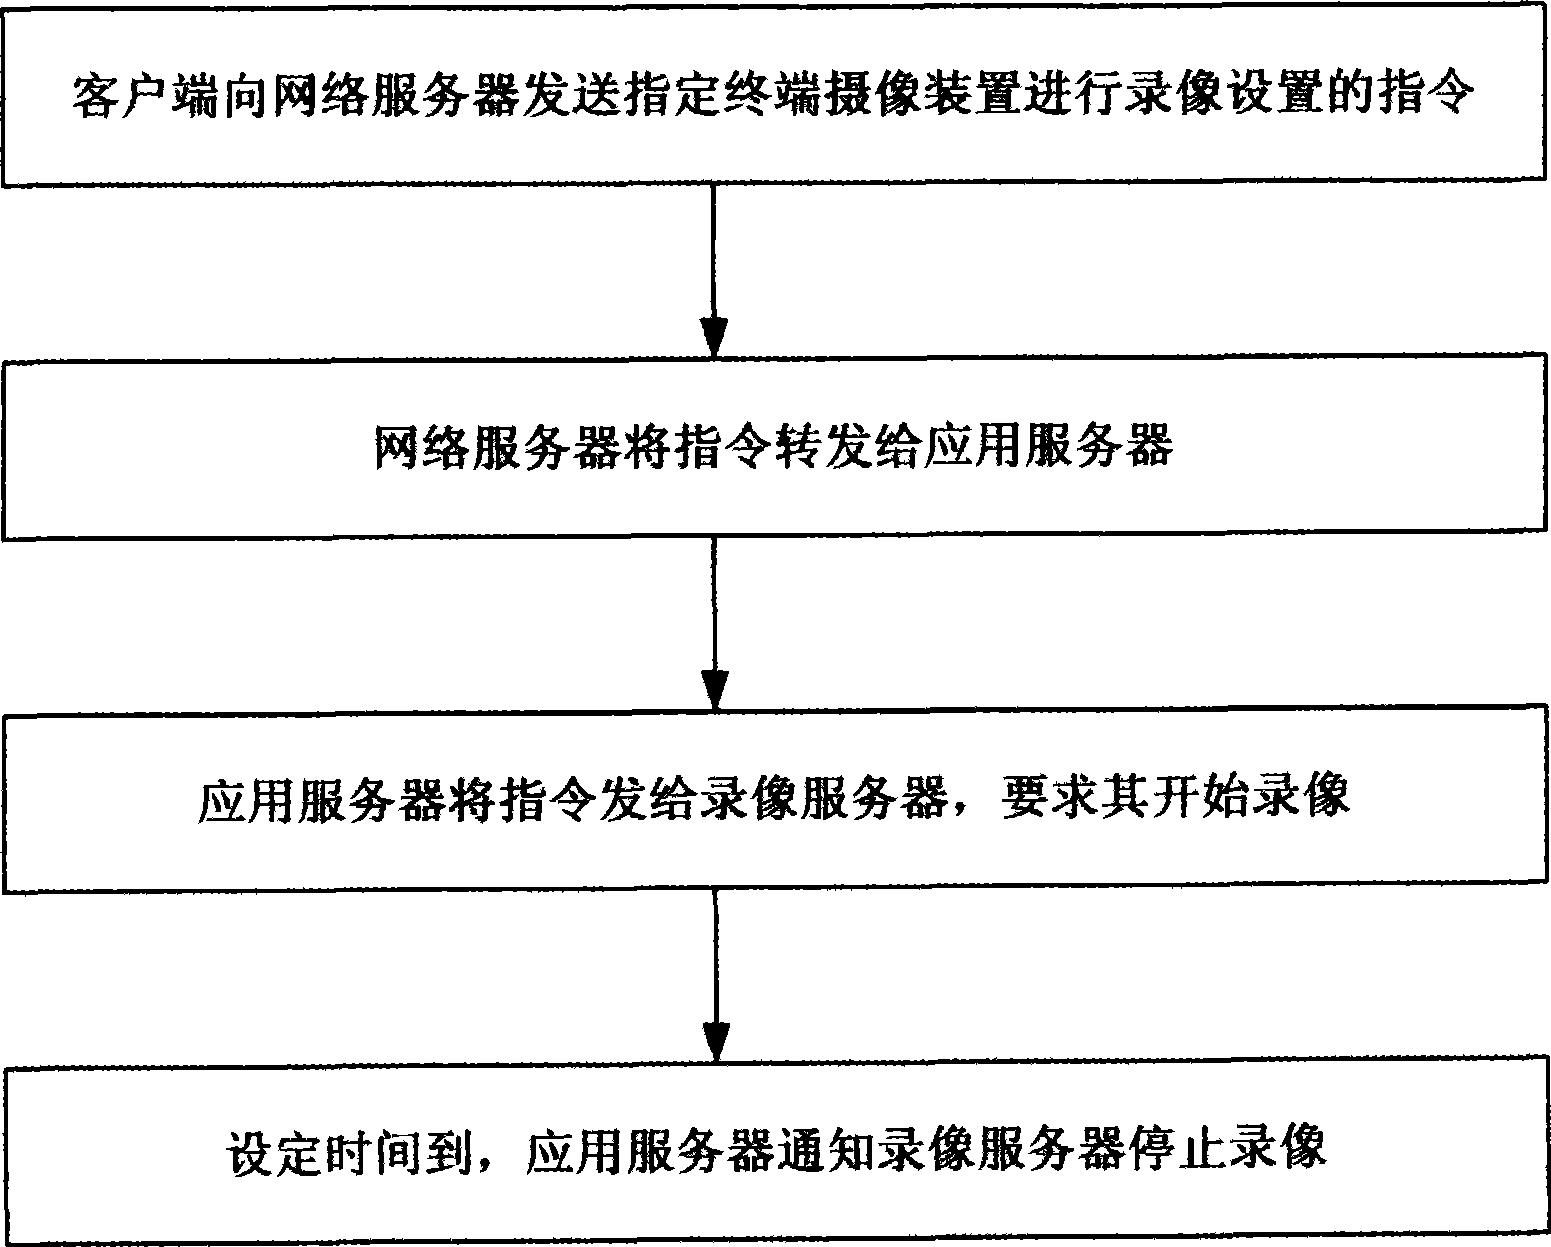 System configuring information modifying and storing method used by network video monitoring system